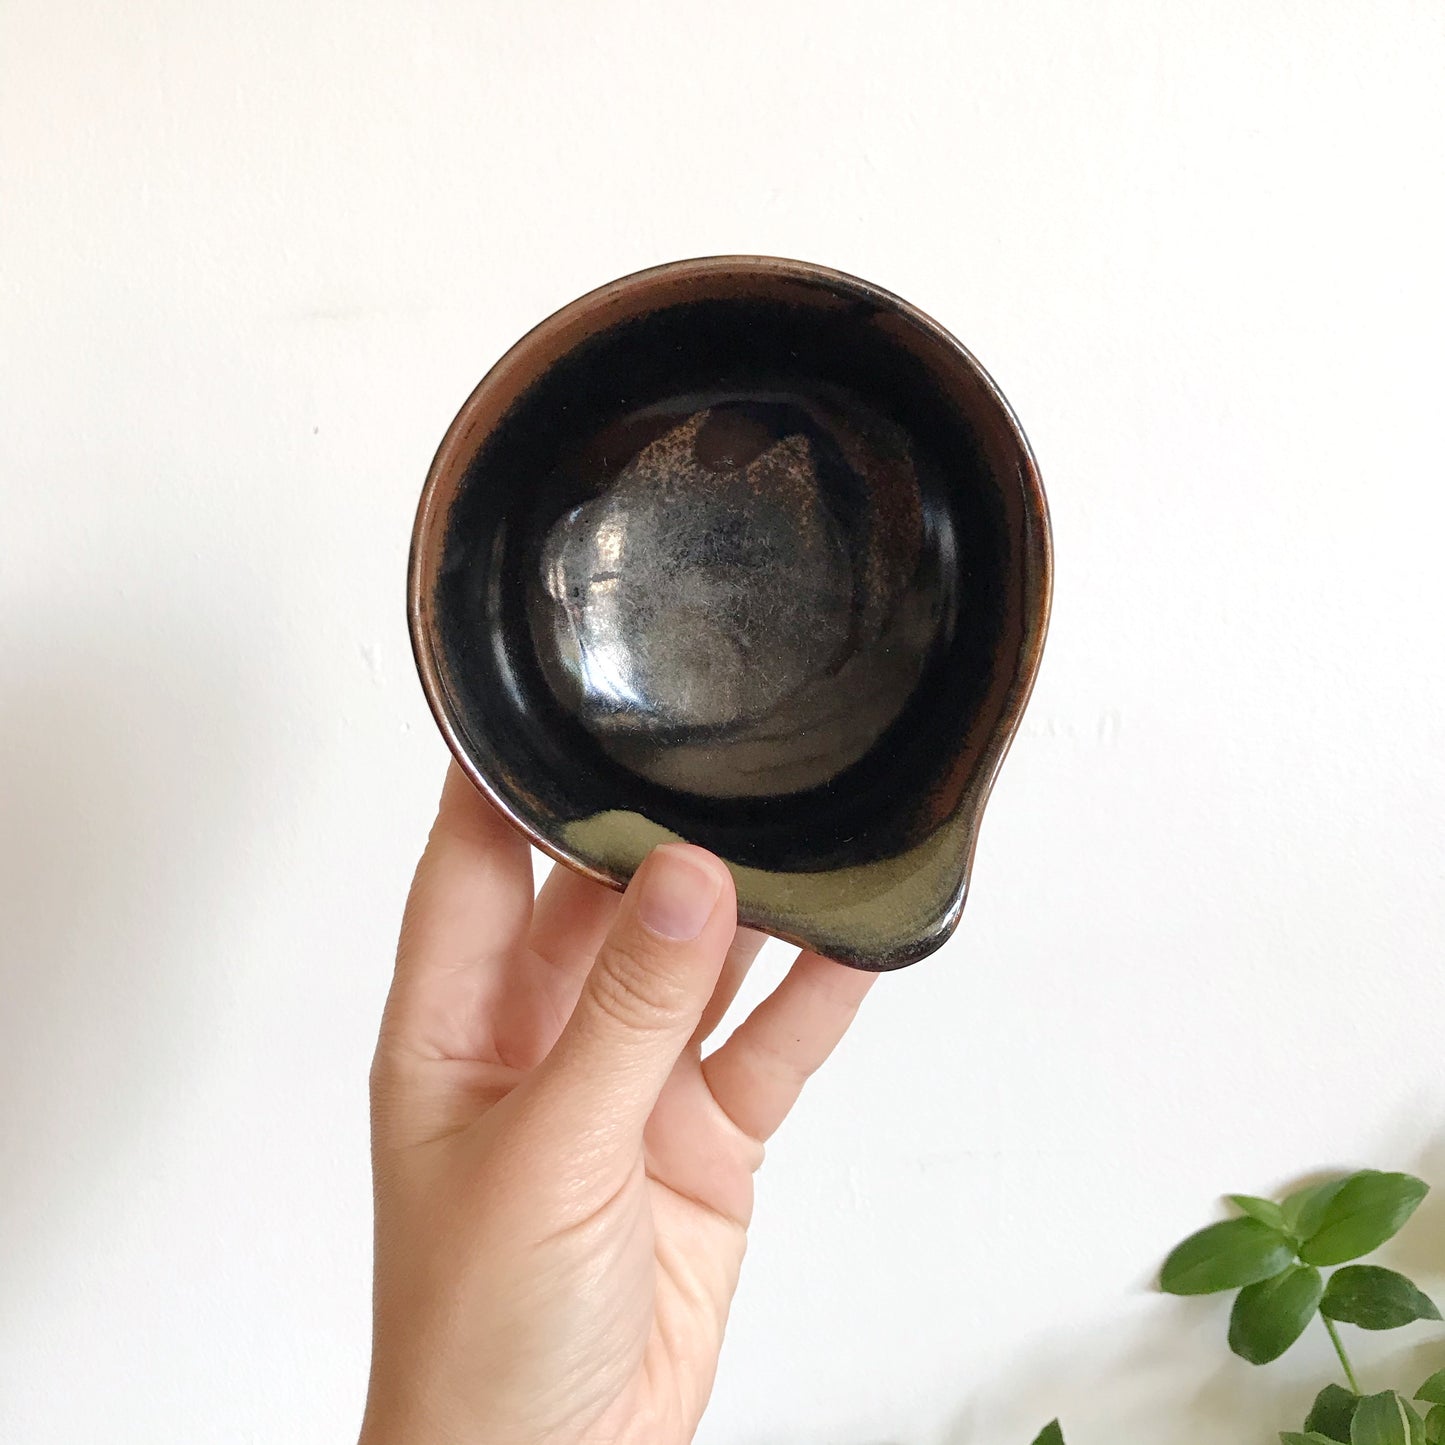 Handcrafted Asymmetrical Pottery Dish